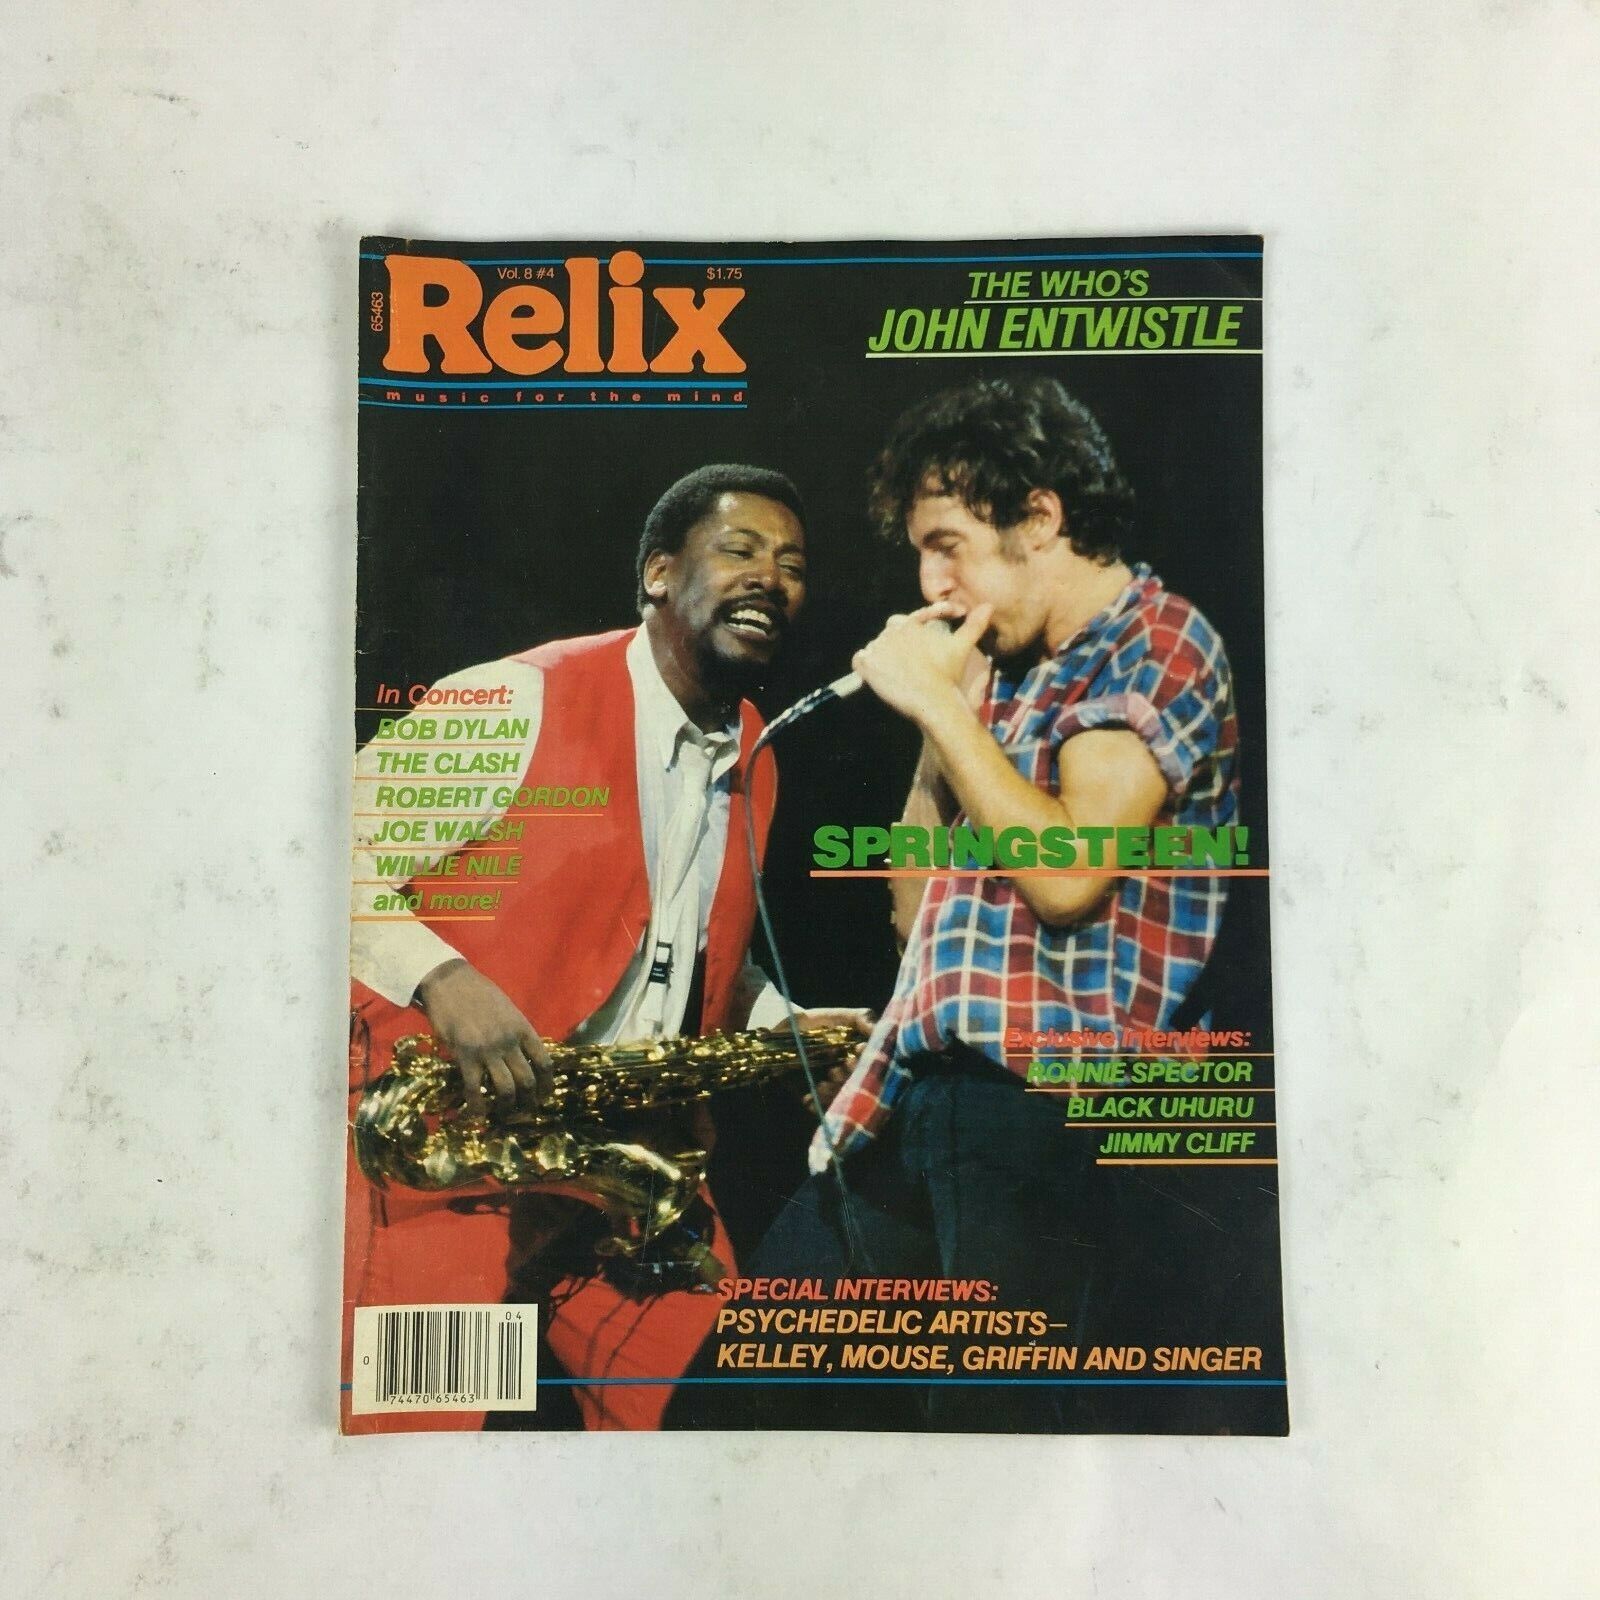 Primary image for Relix Vol. 8 Magazine The Who's John Entwistle Springsteen! Ronnie Spector